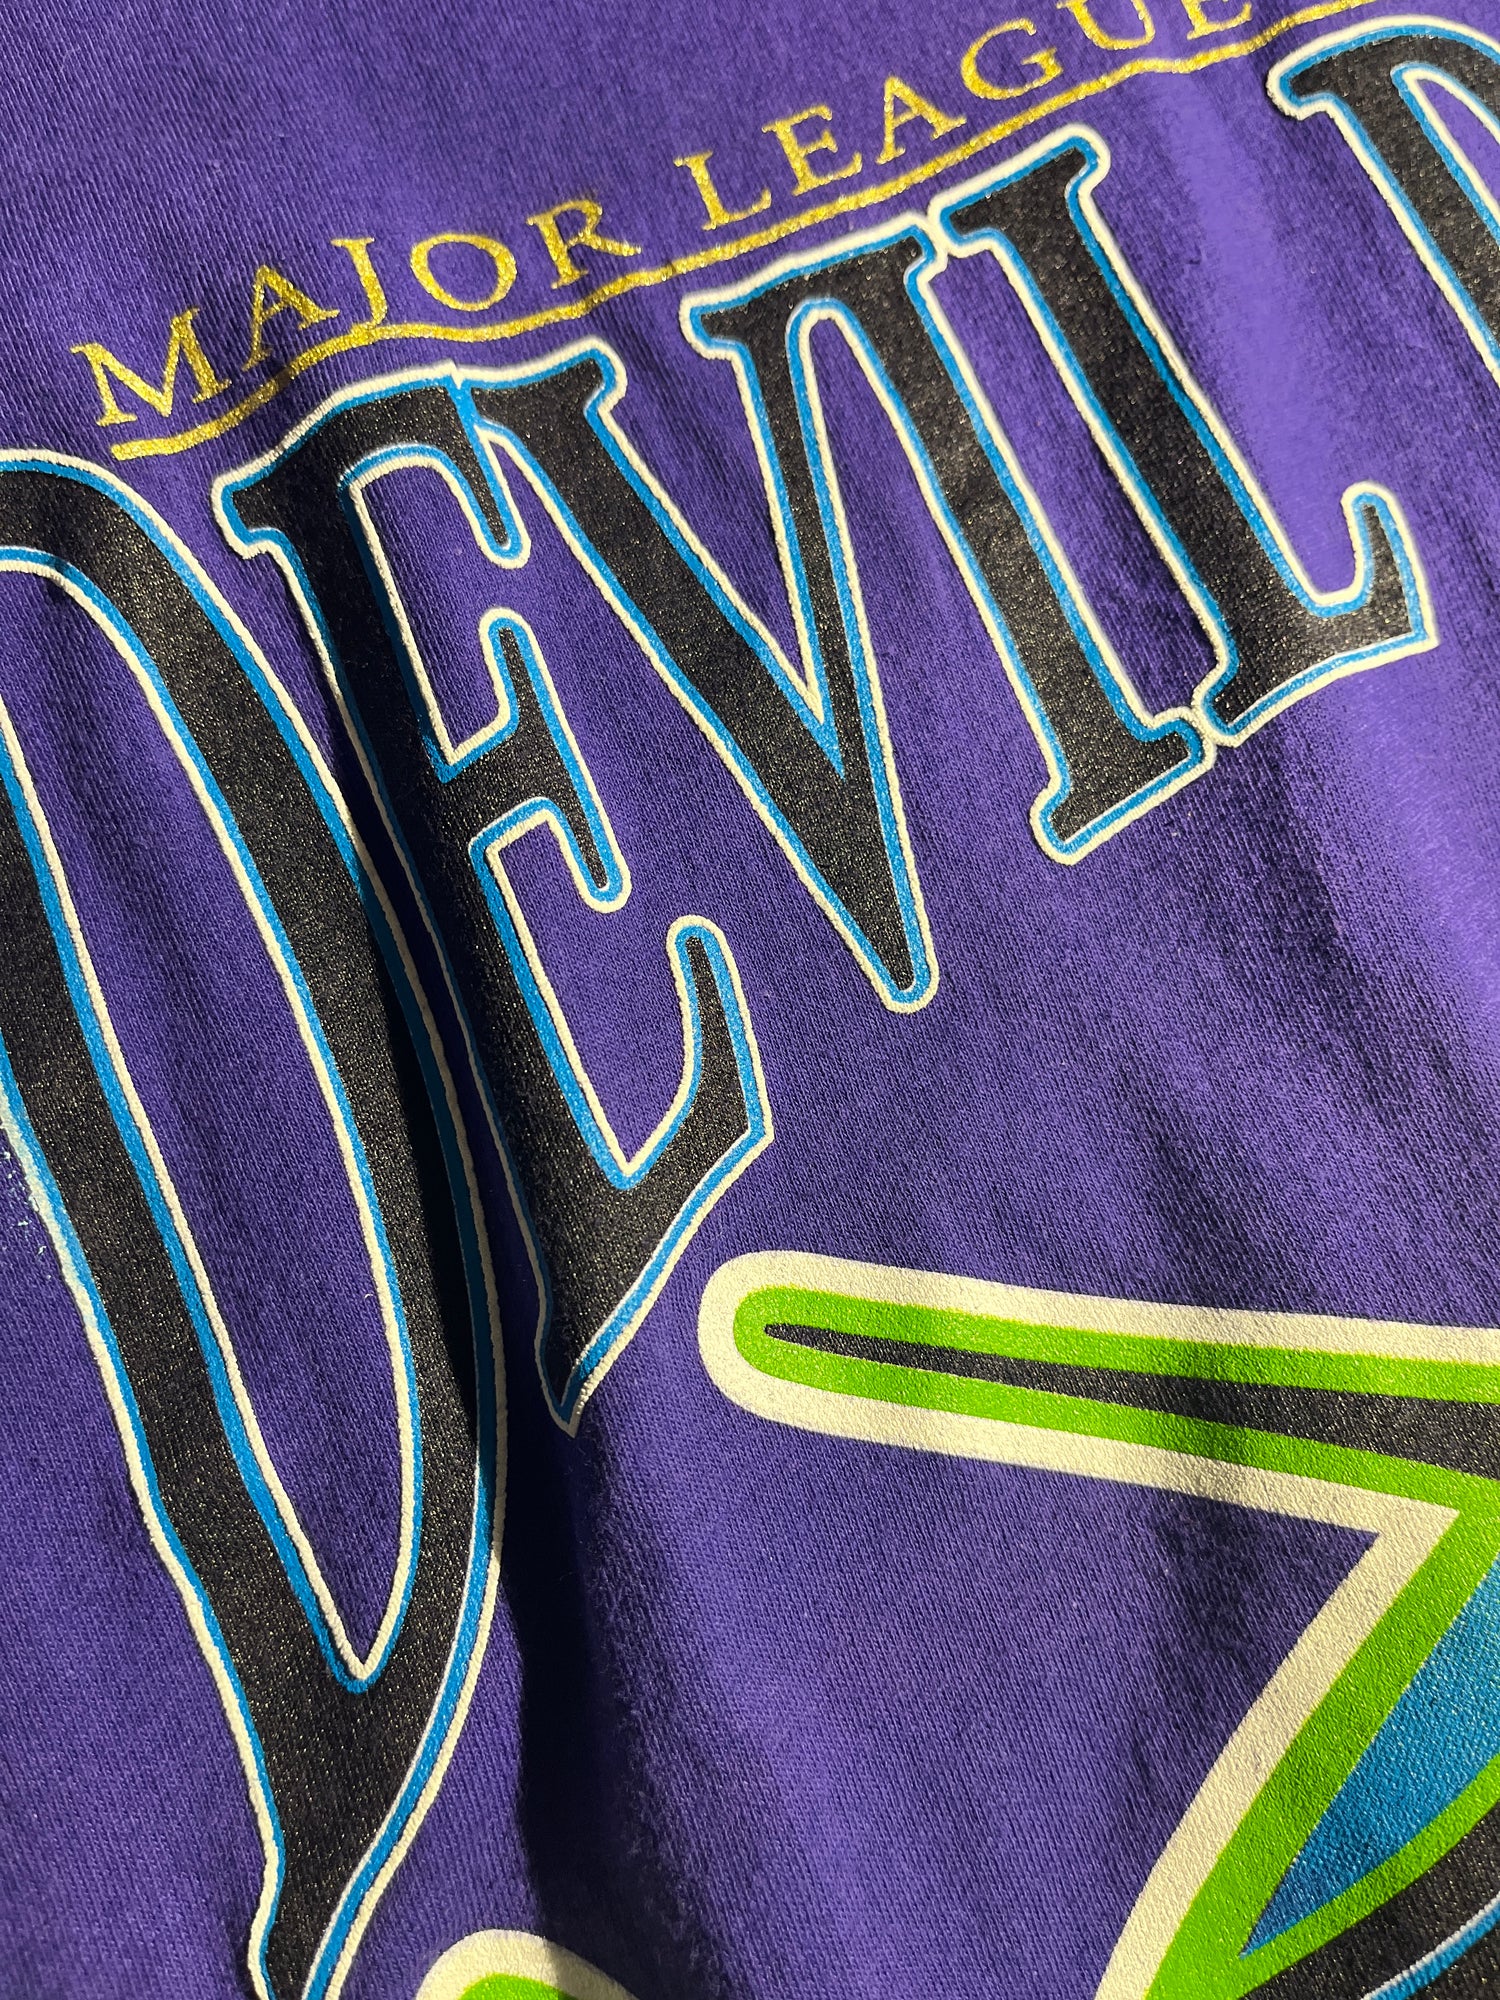 Tampa Bay Devil Rays '98 T-Shirt from Homage. | Charcoal | Vintage Apparel from Homage.